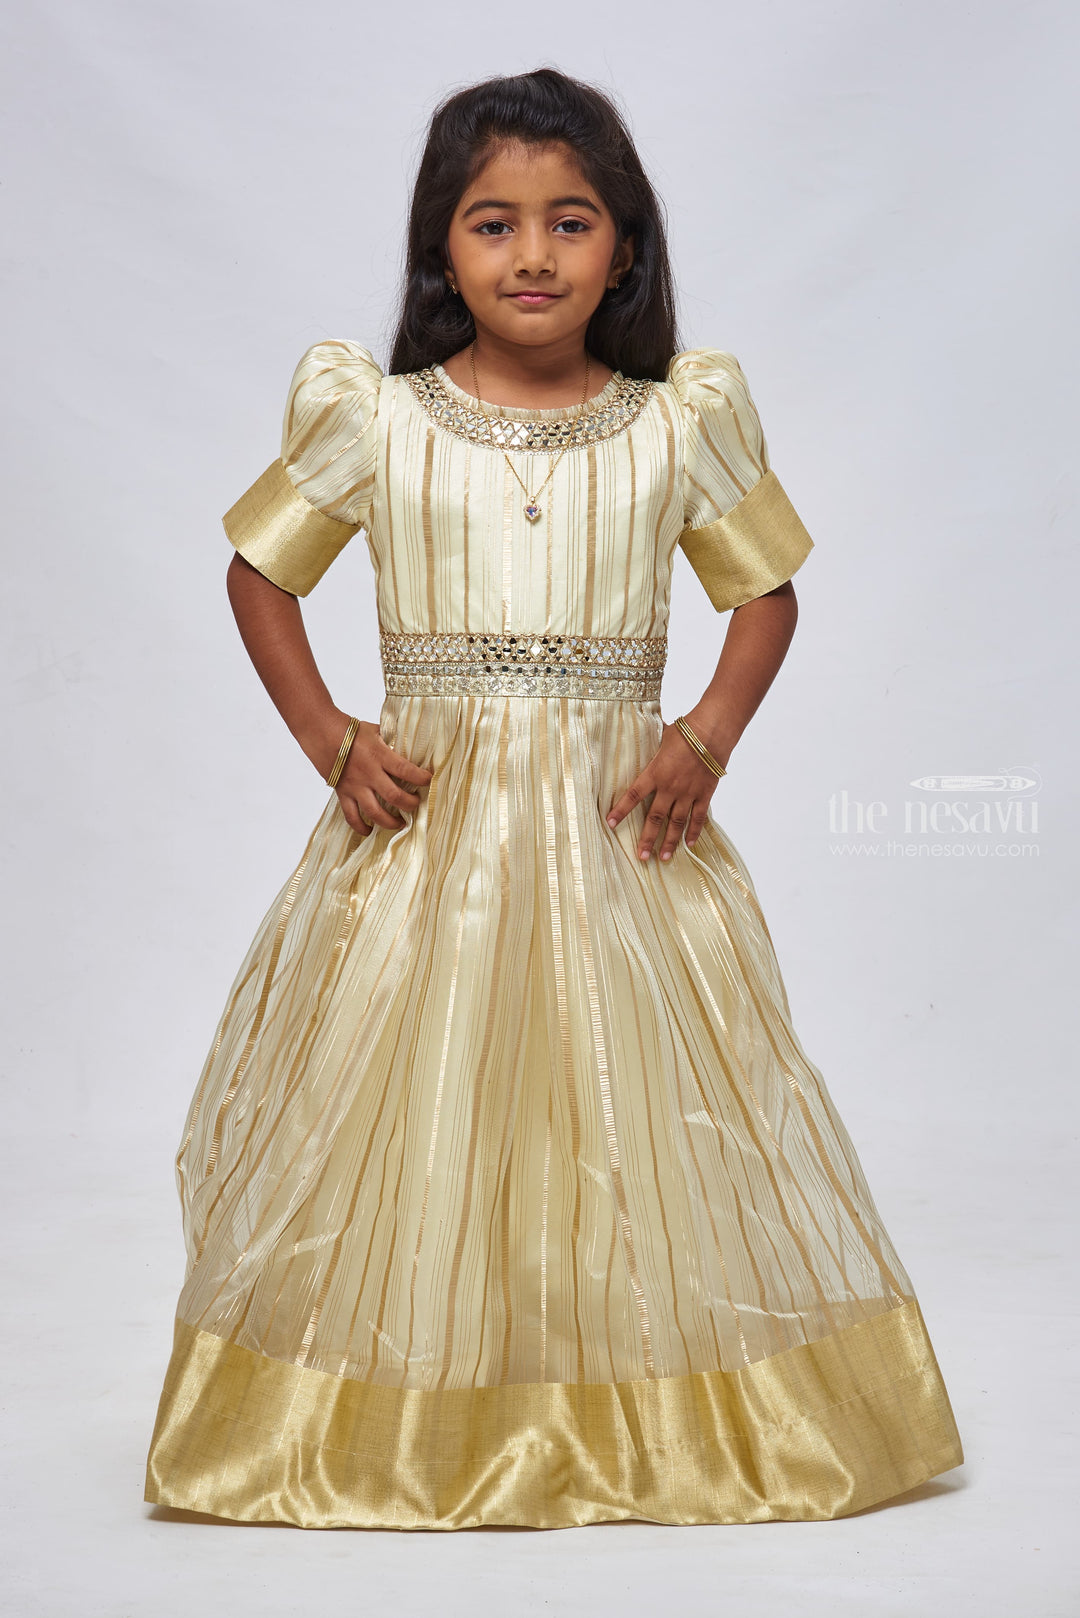 The Nesavu Girls Party Gown Yellow Elegance: Striped Organza Anarkali with Gota Mirror Embroidery for Girls Nesavu 18 (2Y) / Yellow / Organza GA149C-18 Golden Stripe Princess Gown with Puff Sleeves | Perfect for Special Occasions | The Nesavu